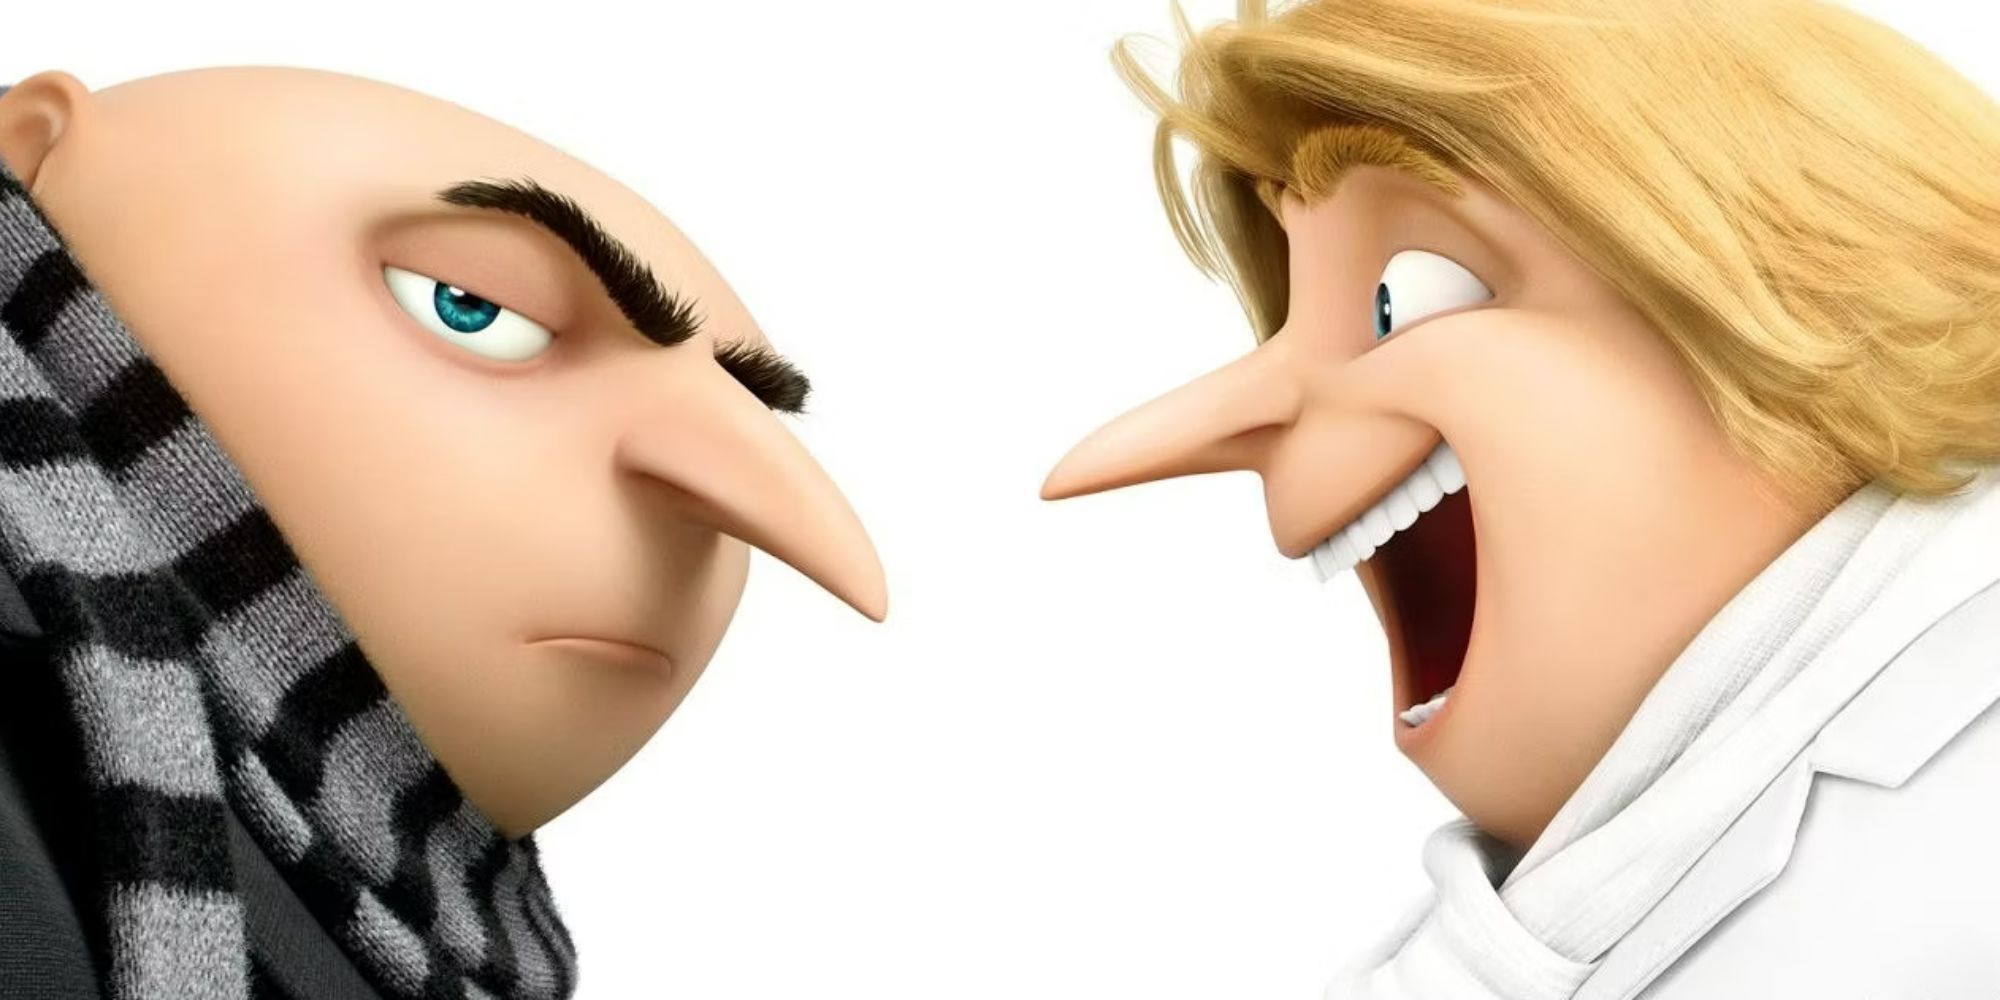 Despicable Me 3 poster (cropped) featuring Gru and his brother